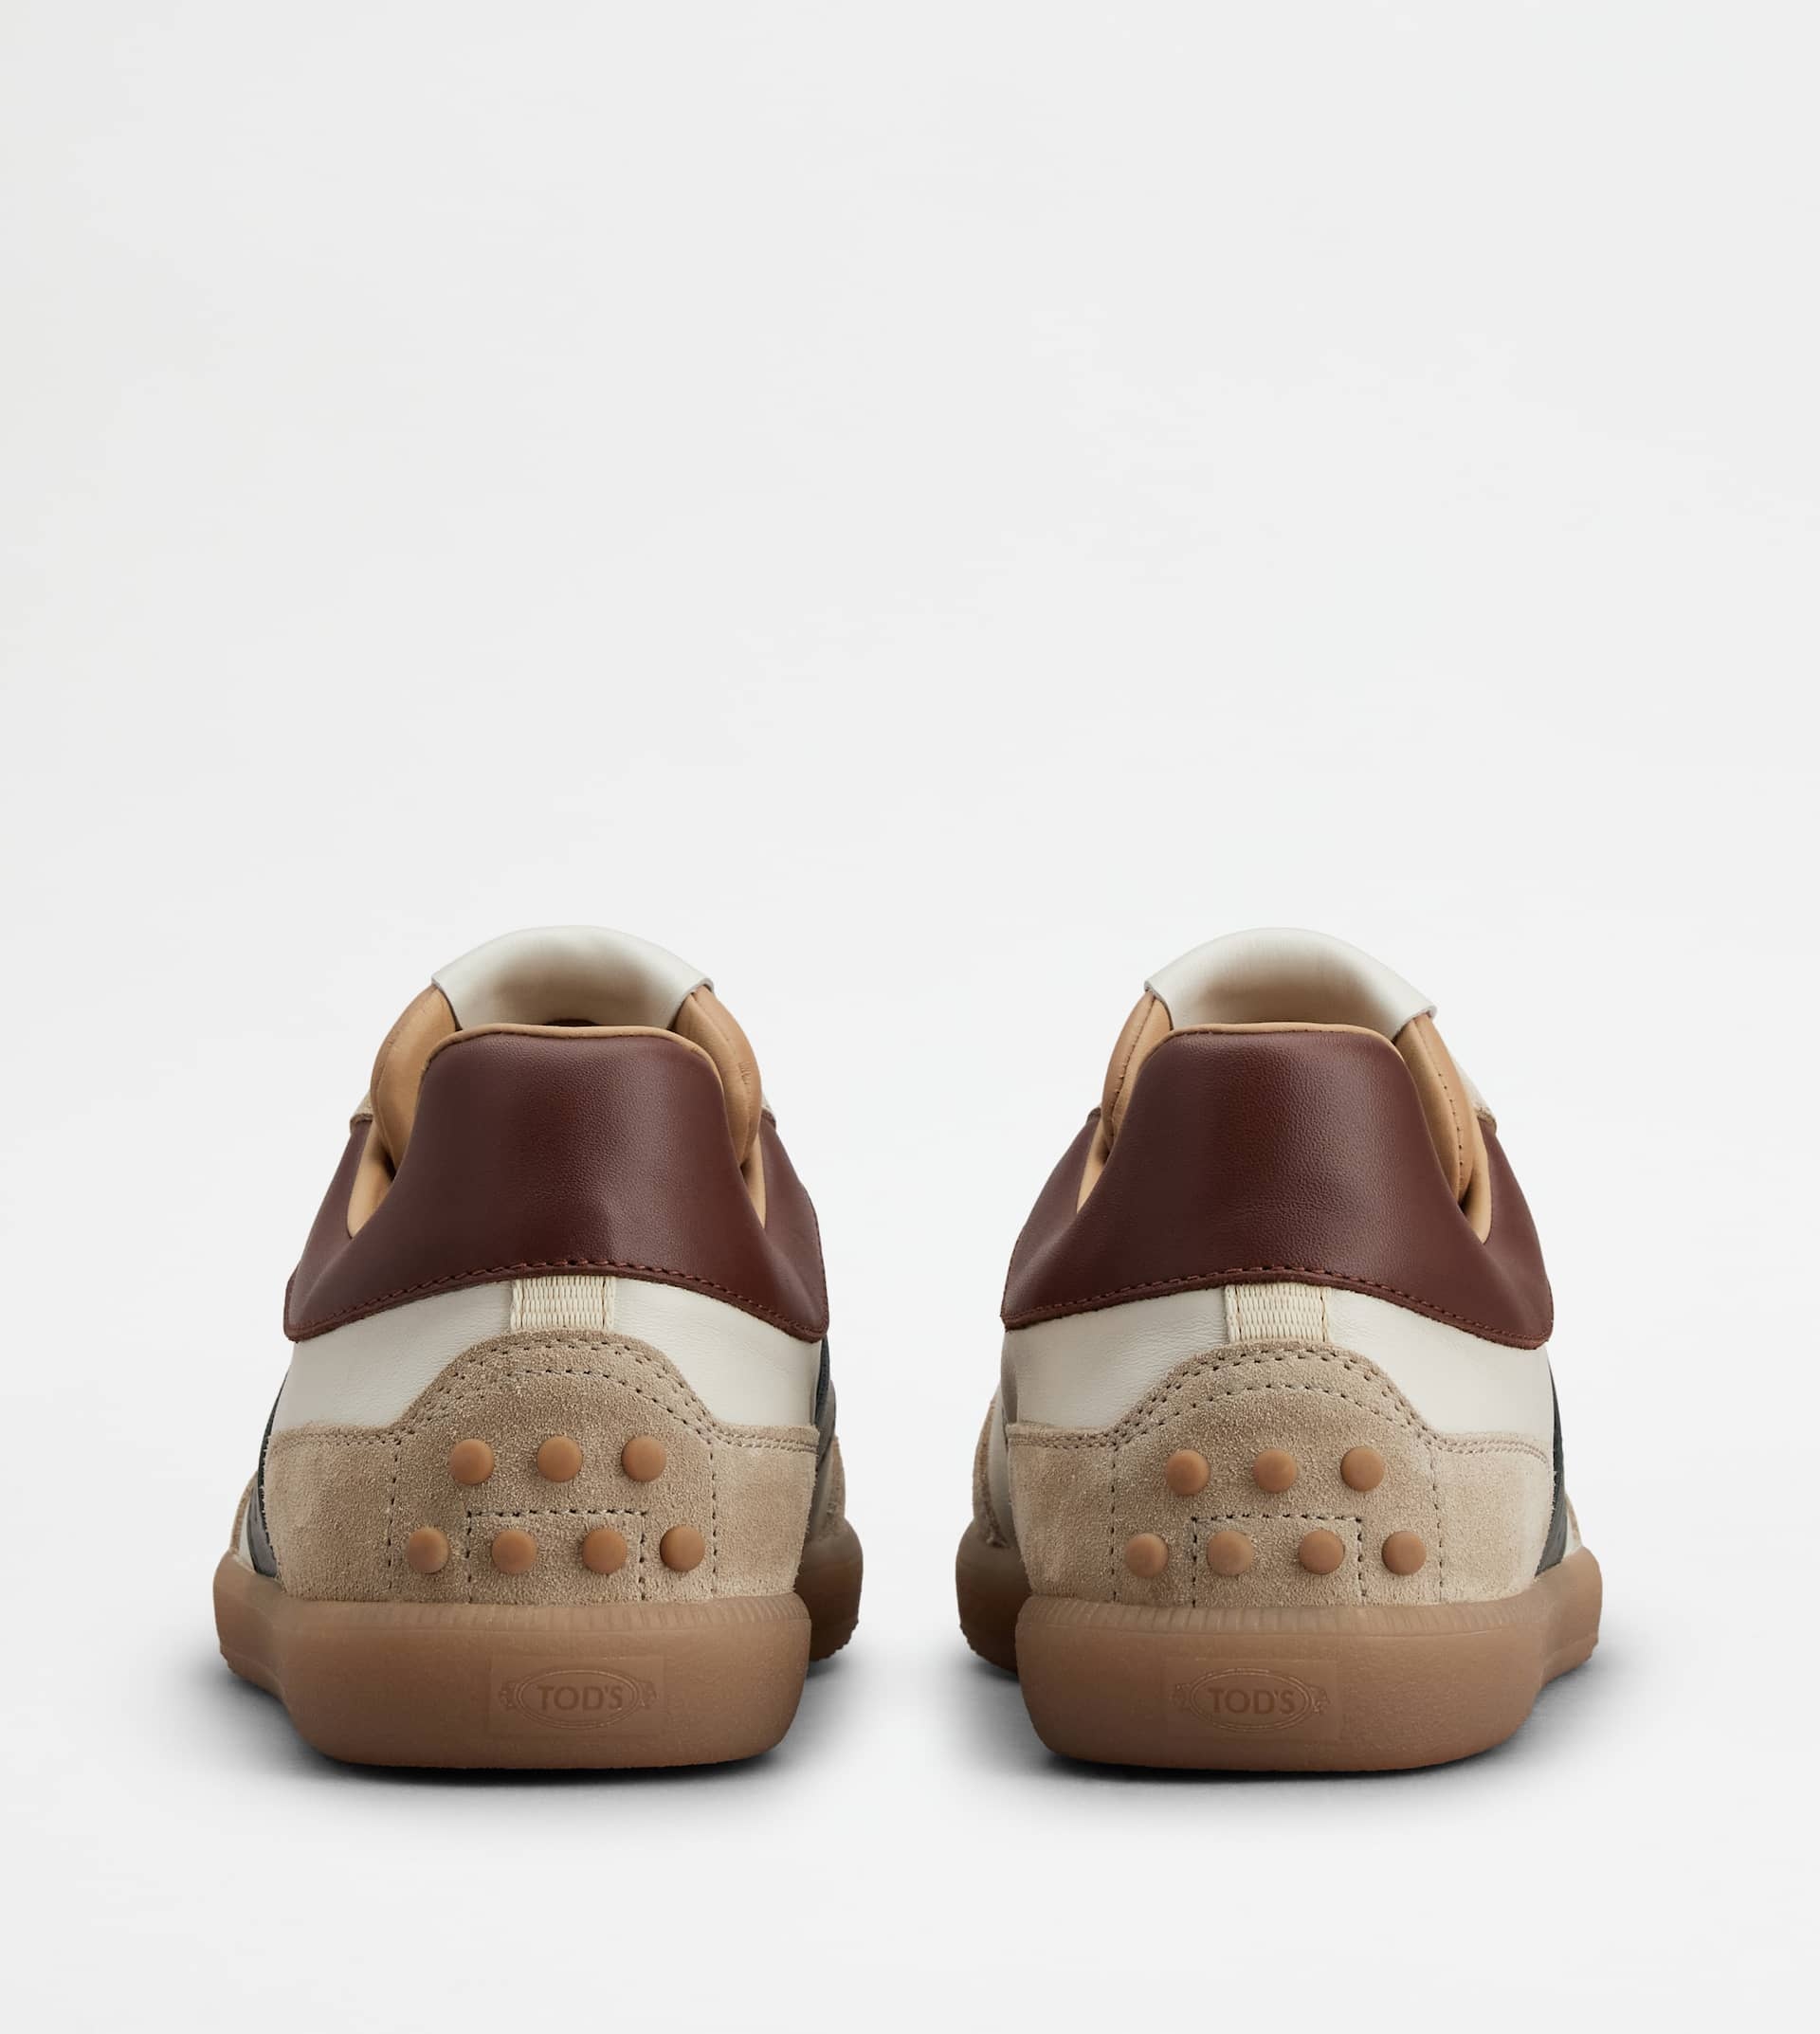 TOD'S TABS SNEAKERS IN SUEDE - OFF WHITE, BROWN, GREEN - 3